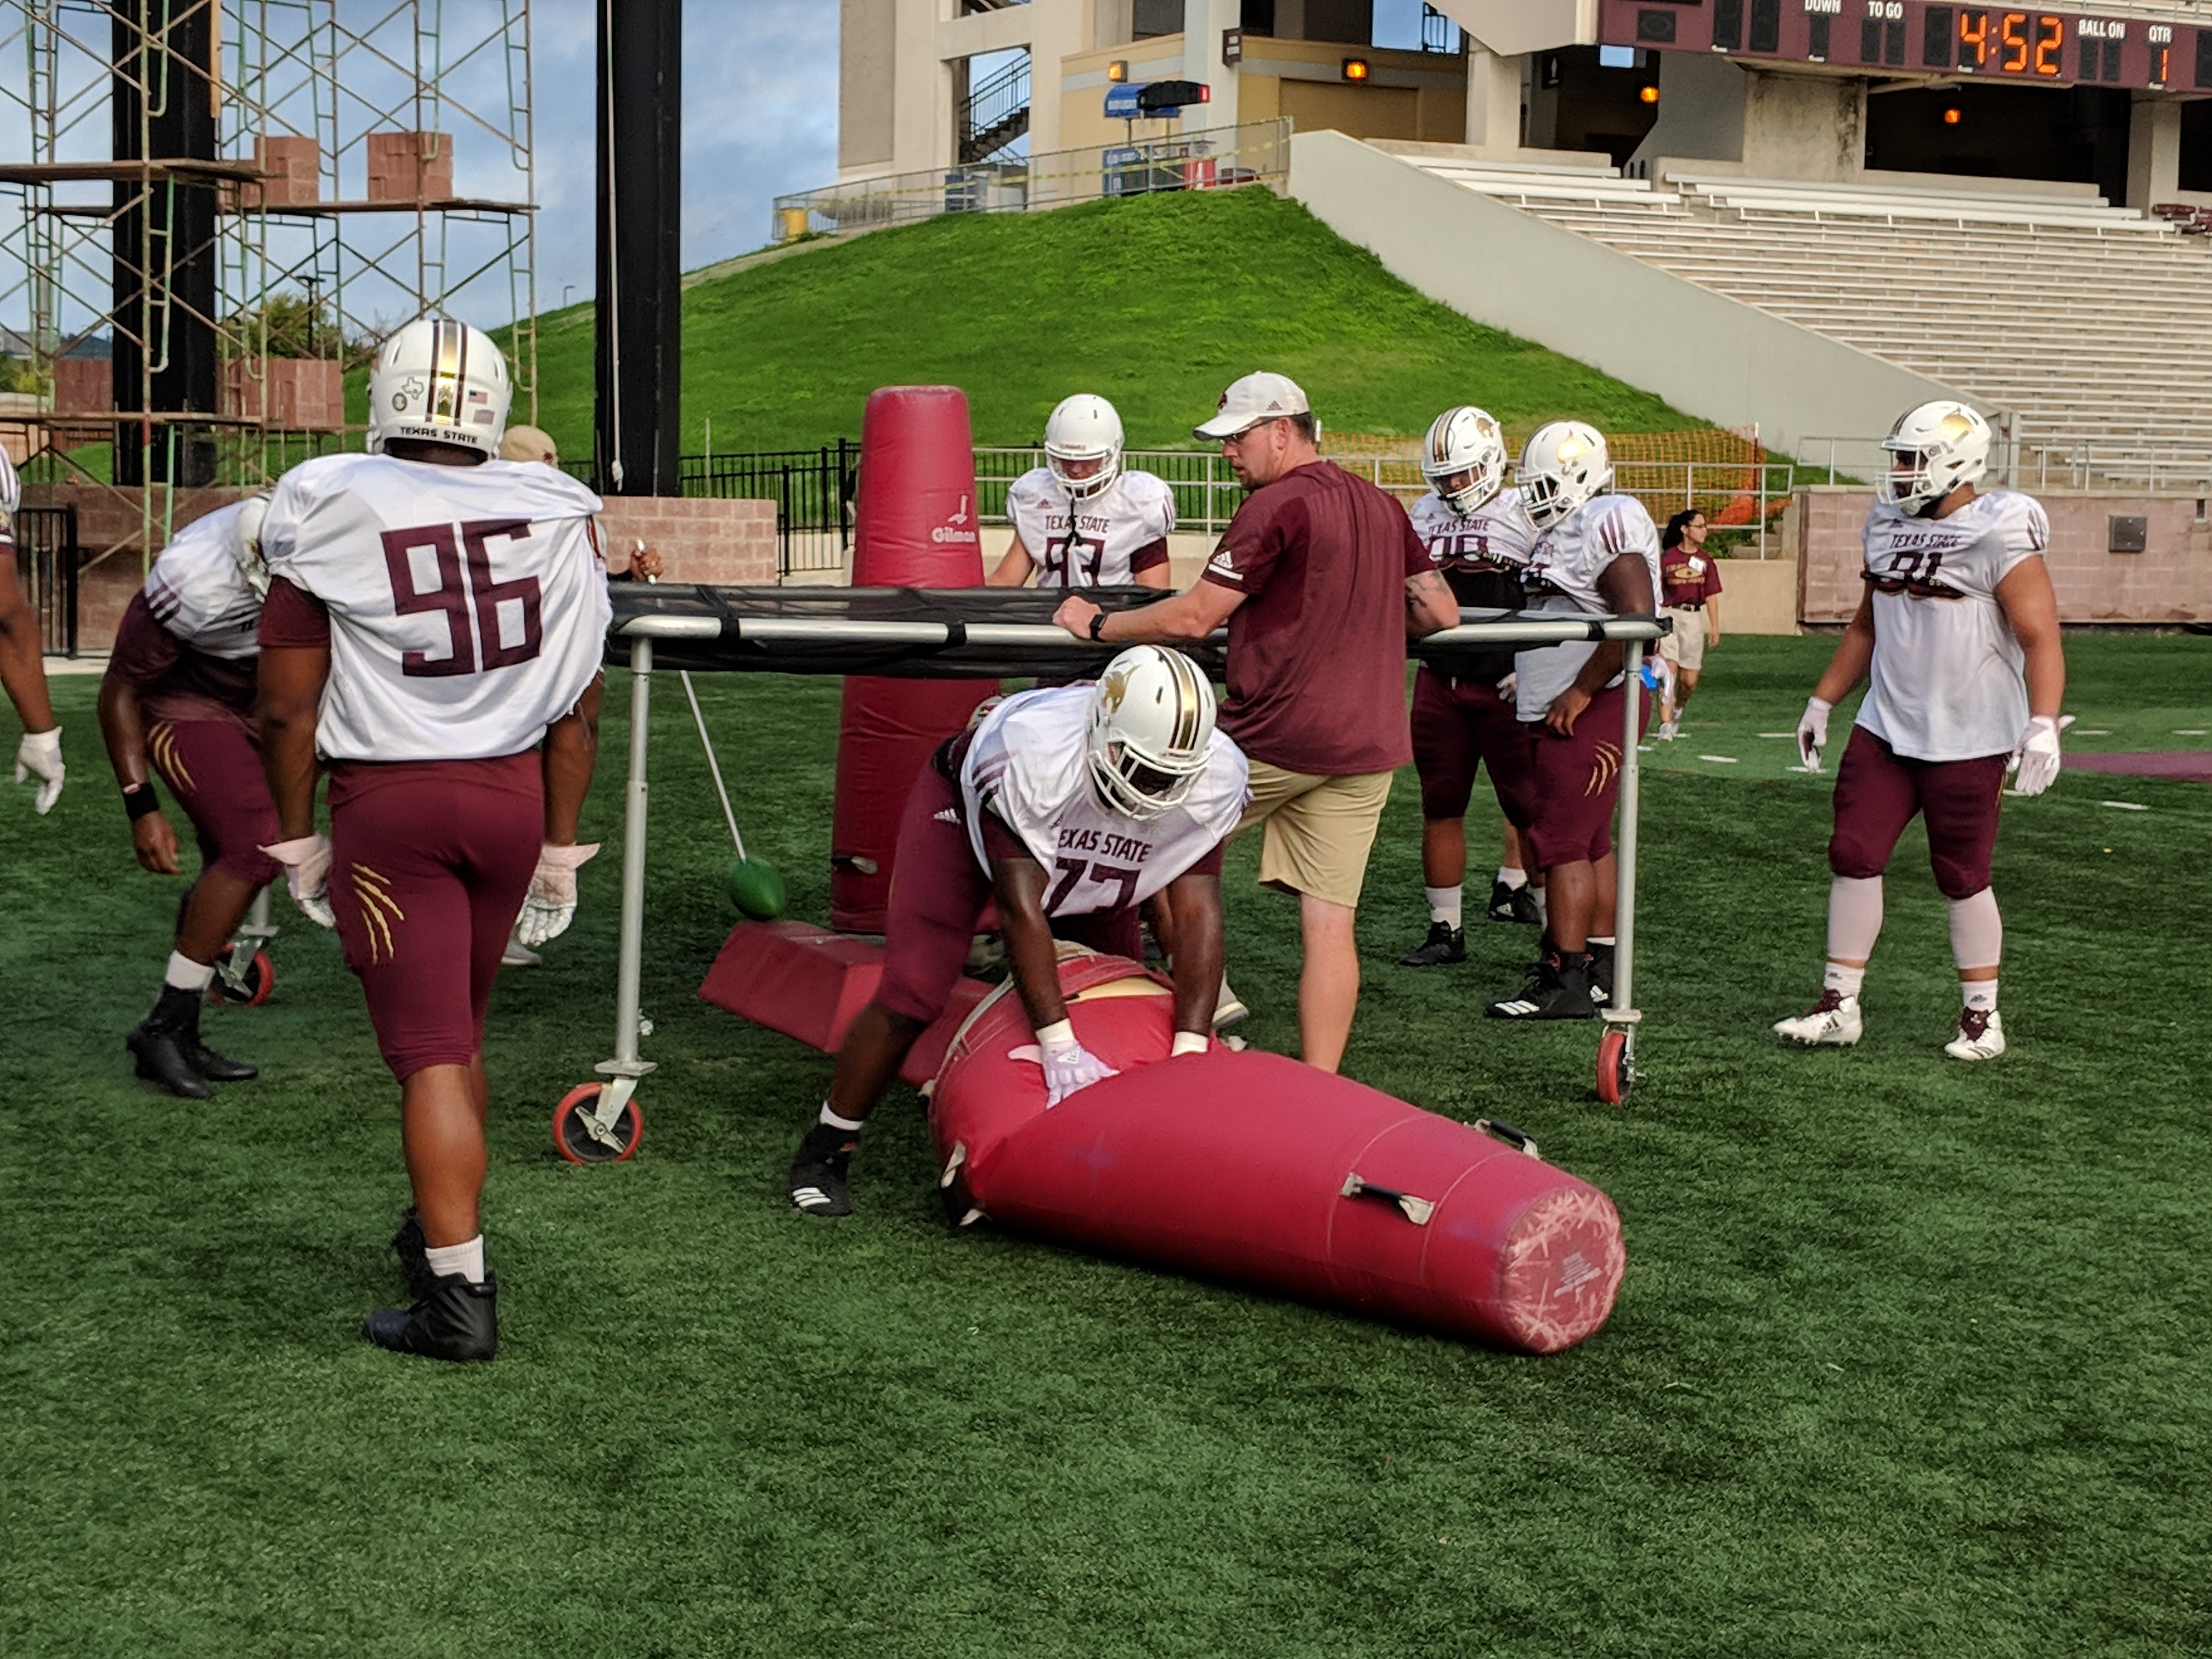 On a cloudy day in San Marcos, the defensive line, in white jerseys, practices scurrying under a netting to pop a practice dummy bag. Number 73 Jaquel Pierce is pictured finishing the tackling.